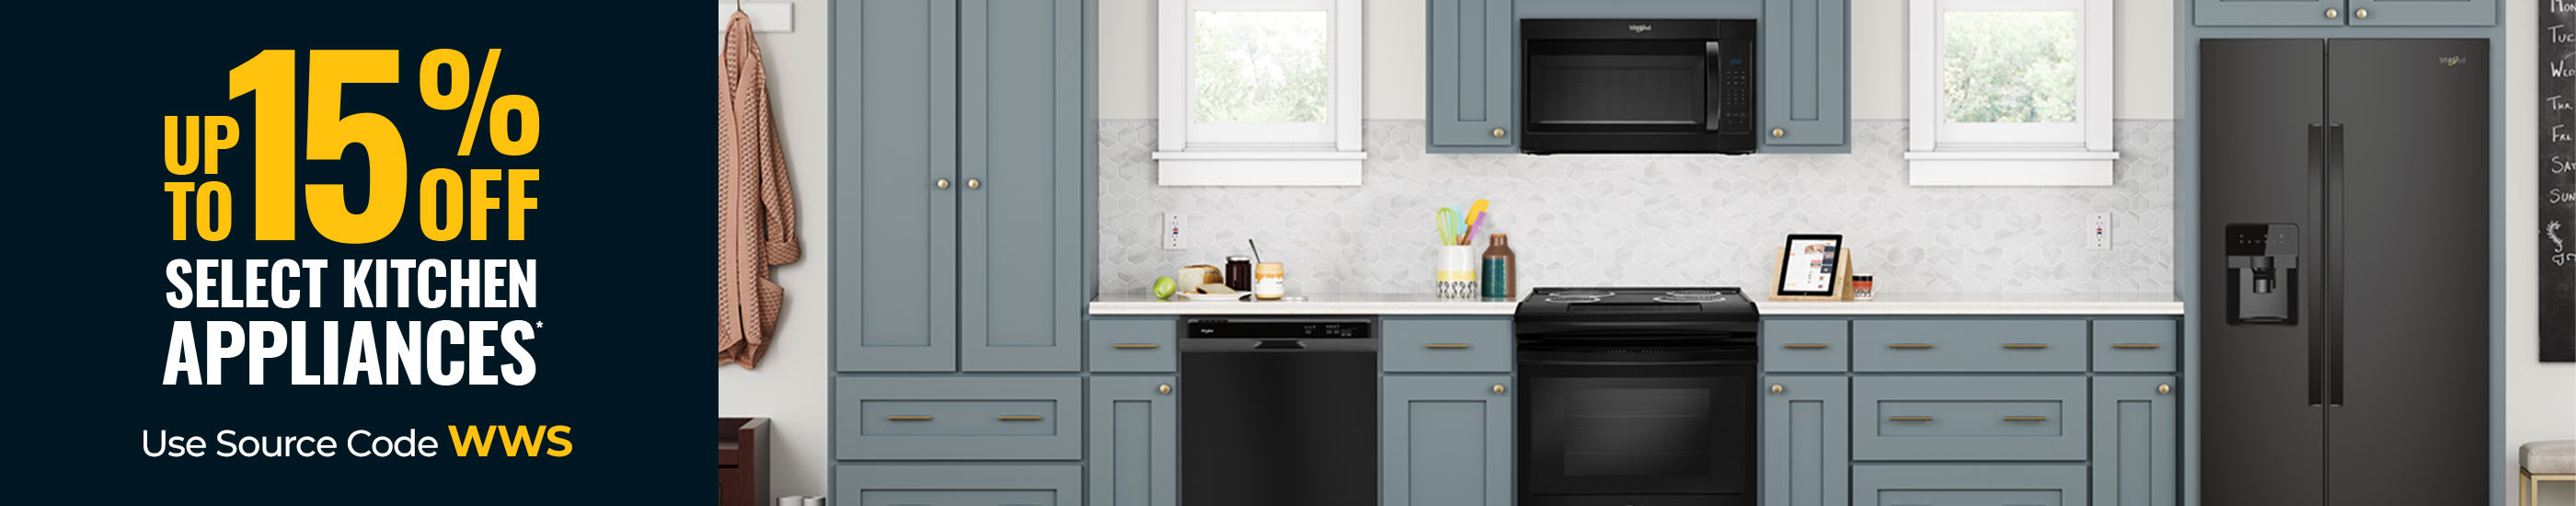 Up To 15 Percent Off Select Kitchen Appliances